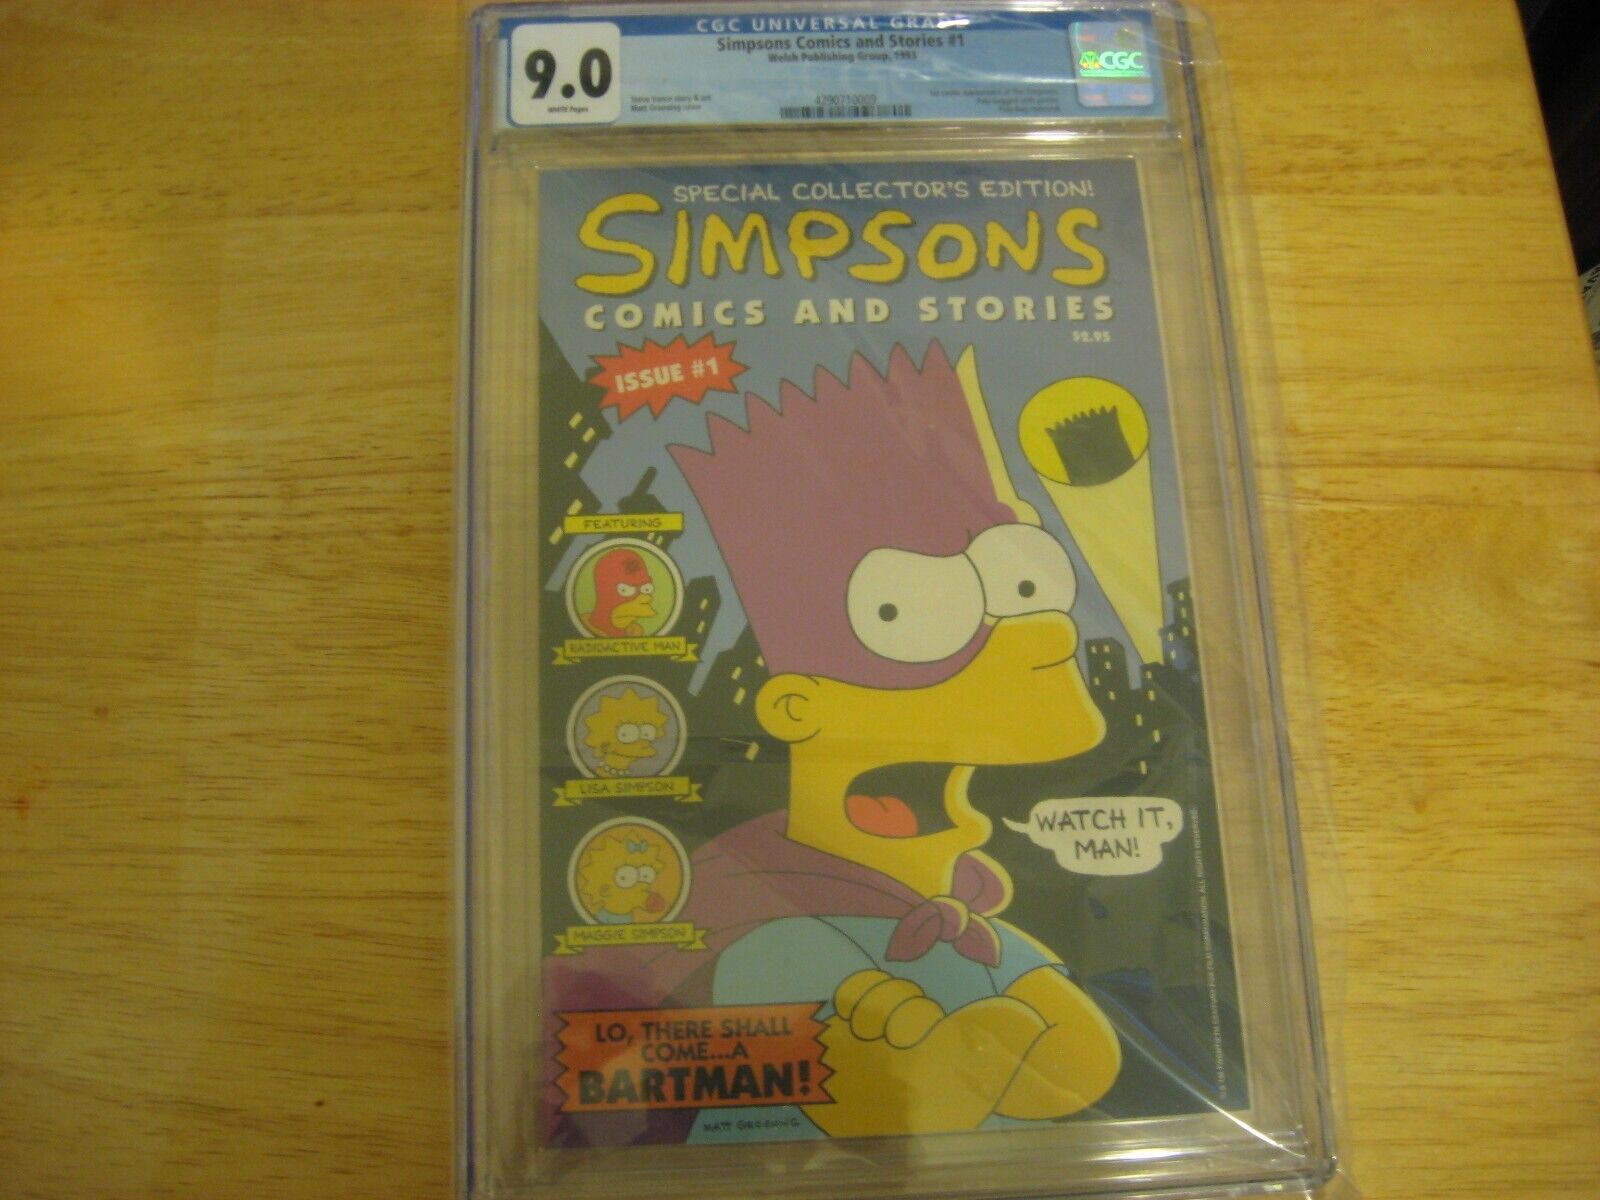 1993 Special Edition Simpsons Comics and Stories #1 Issue 1 CGC 9.0